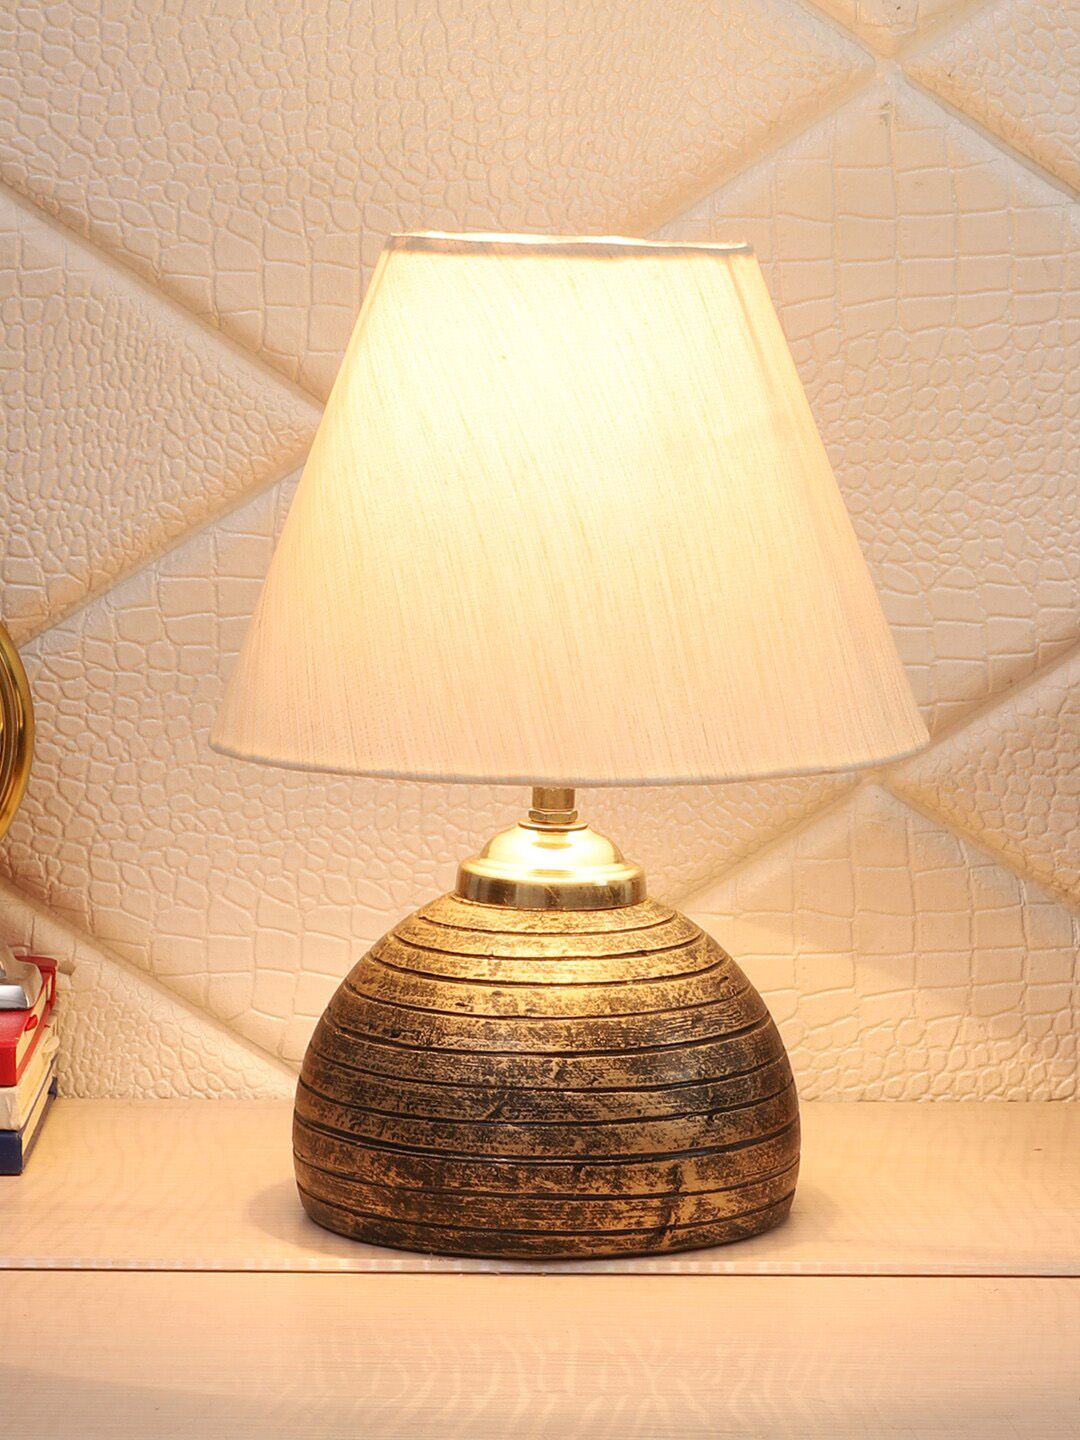 Foziq Mustard Yellow & Brown Textured Metal Table Lamps Price in India